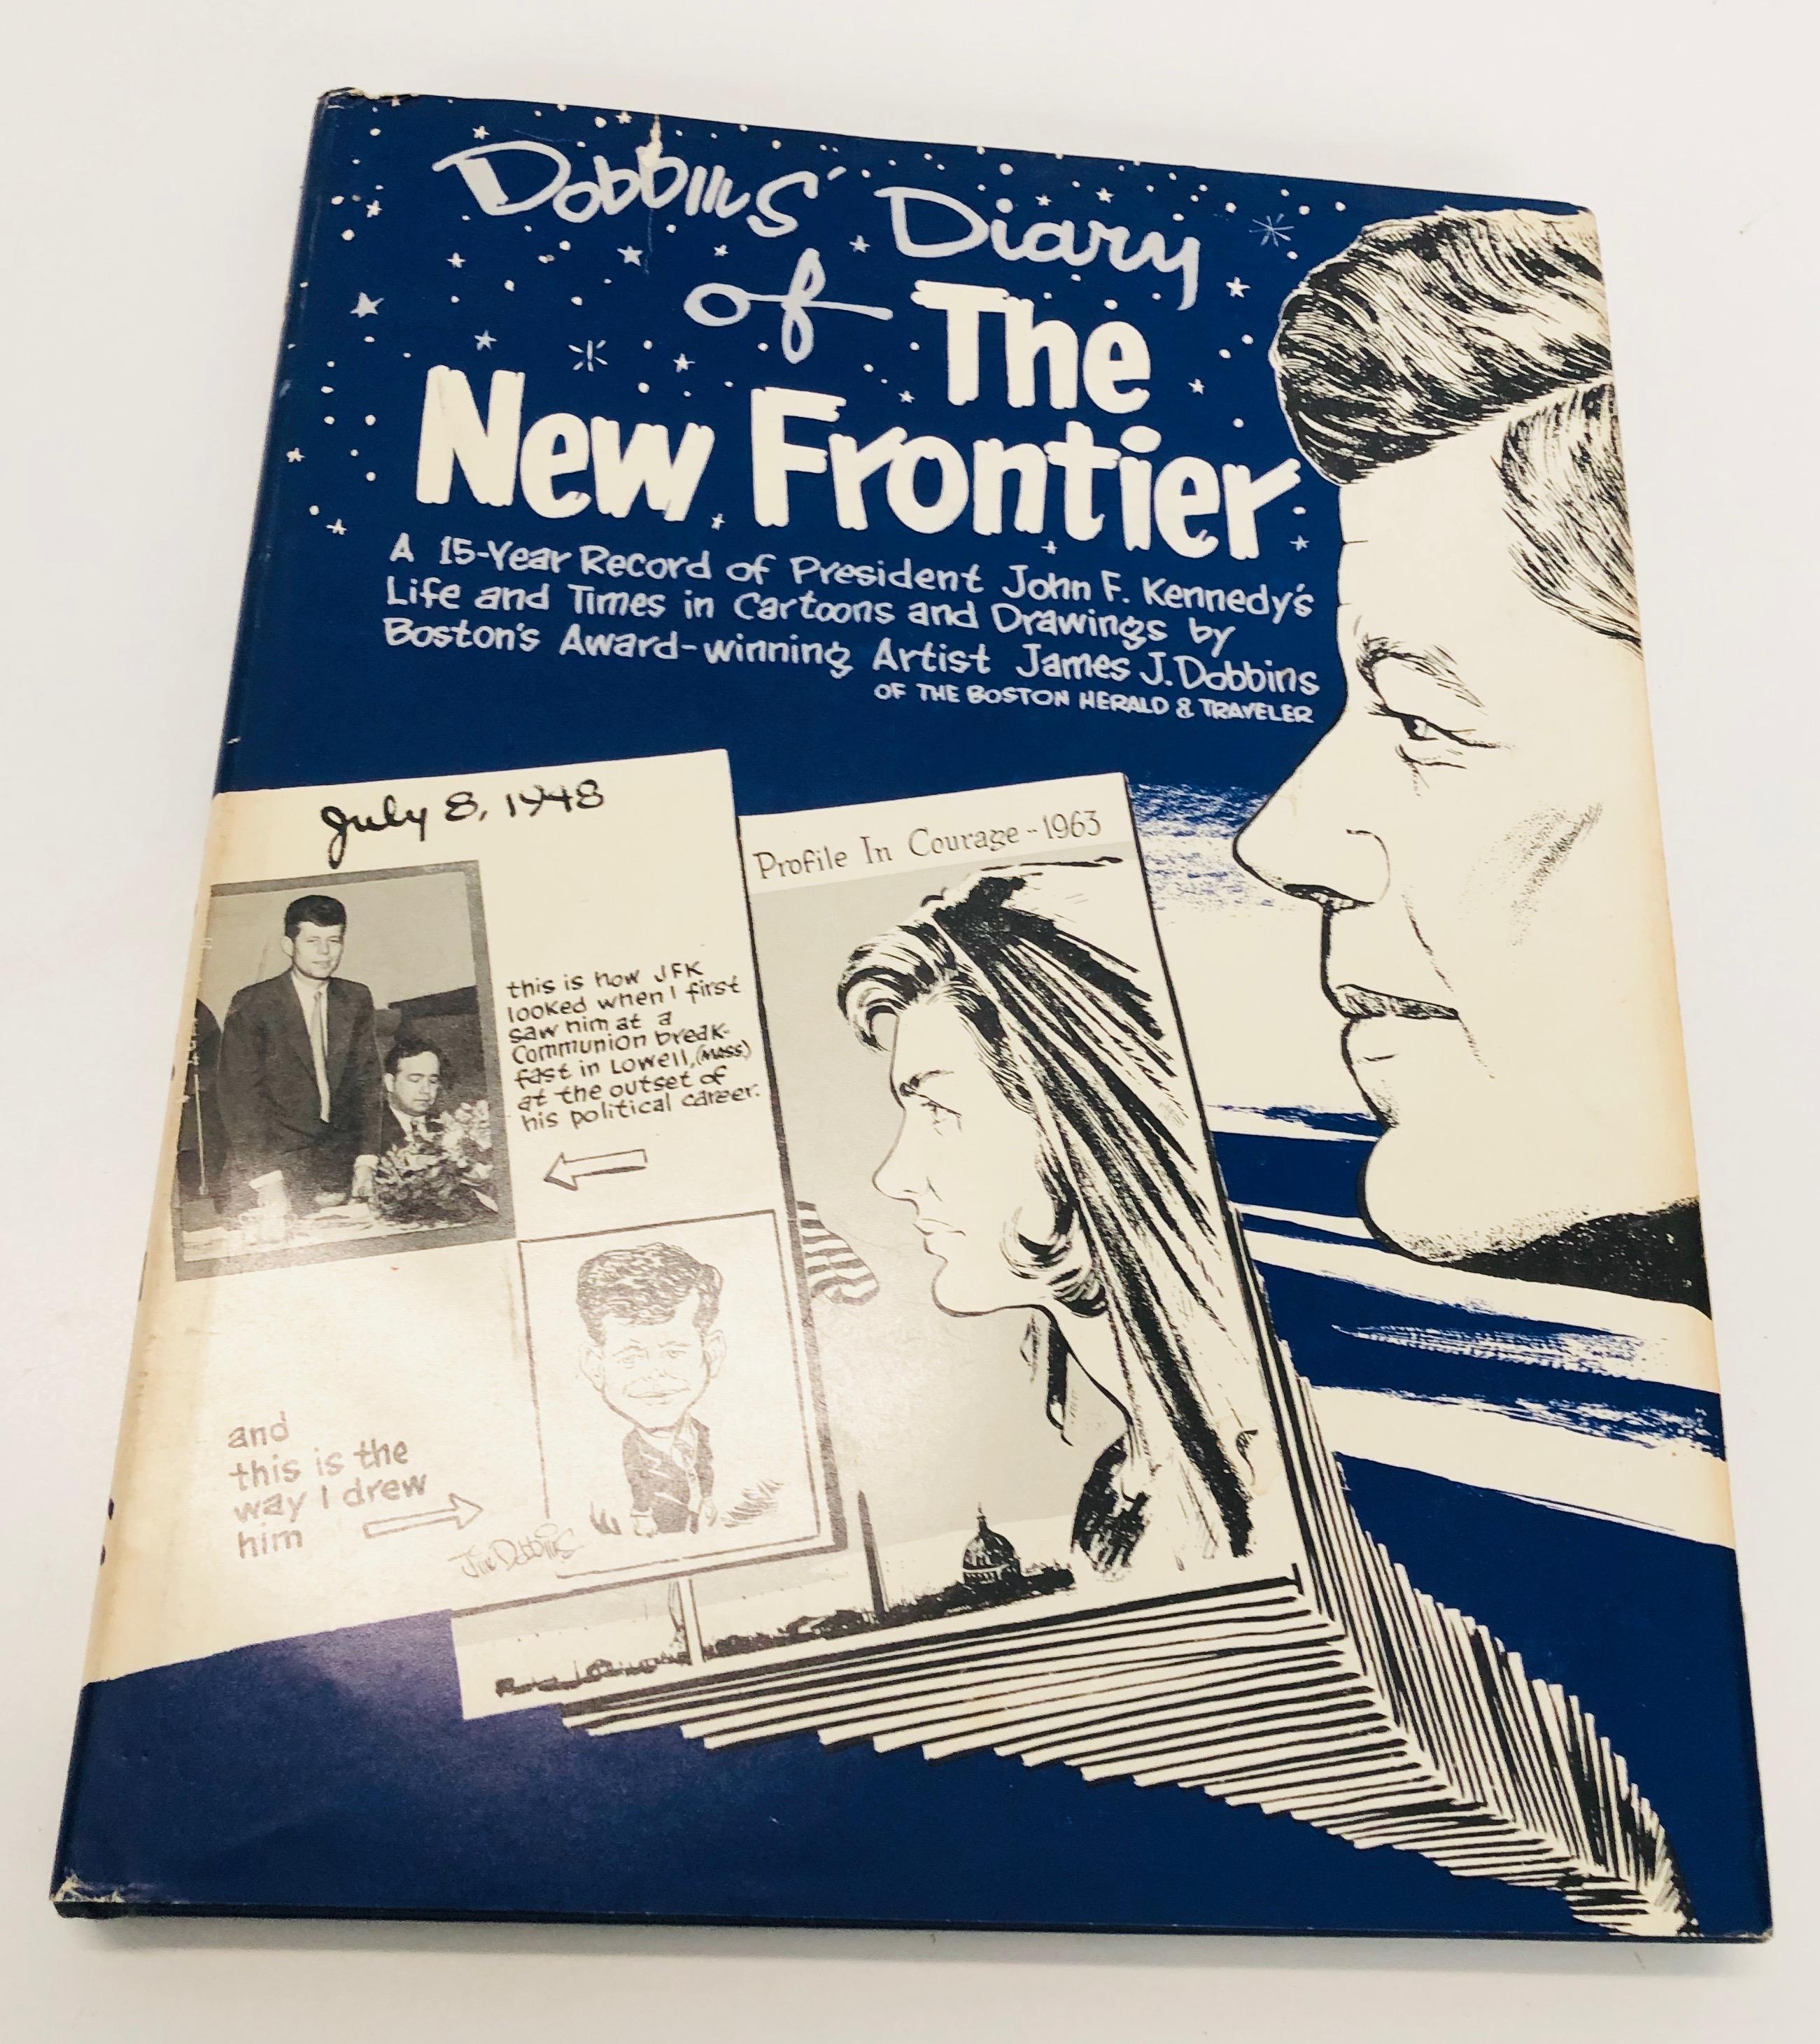 RARE Dobbins Diary of New Frontier by Jim Dobbins (1964) JOHN F. KENNEDY - Limited Edition SIGNED